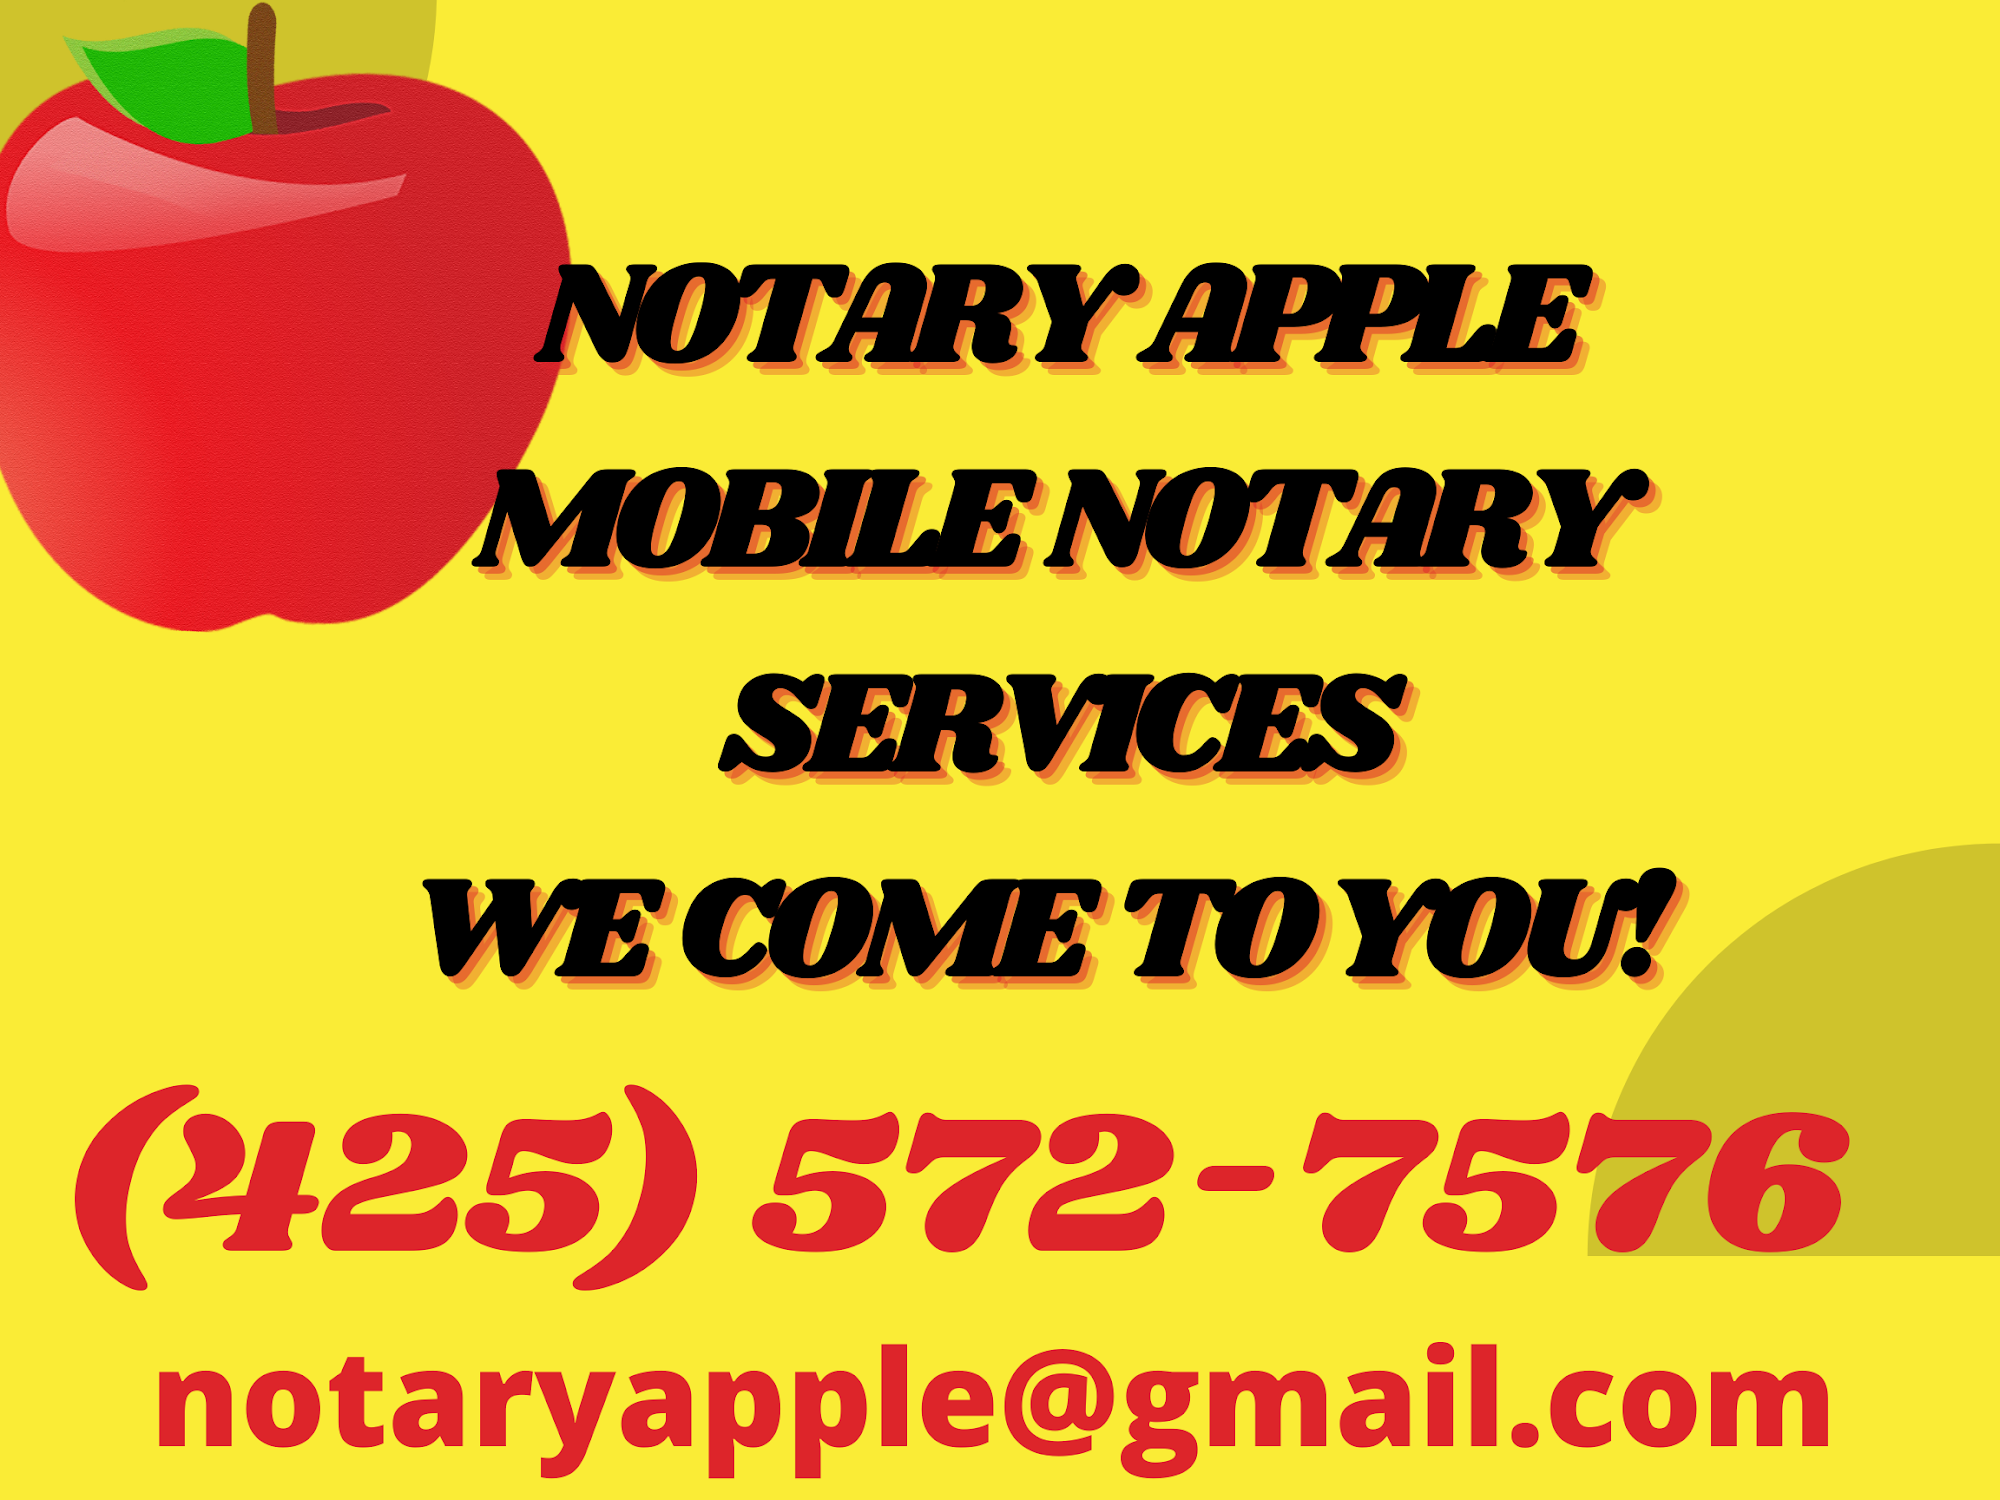 Notary Apple Mobile Notary